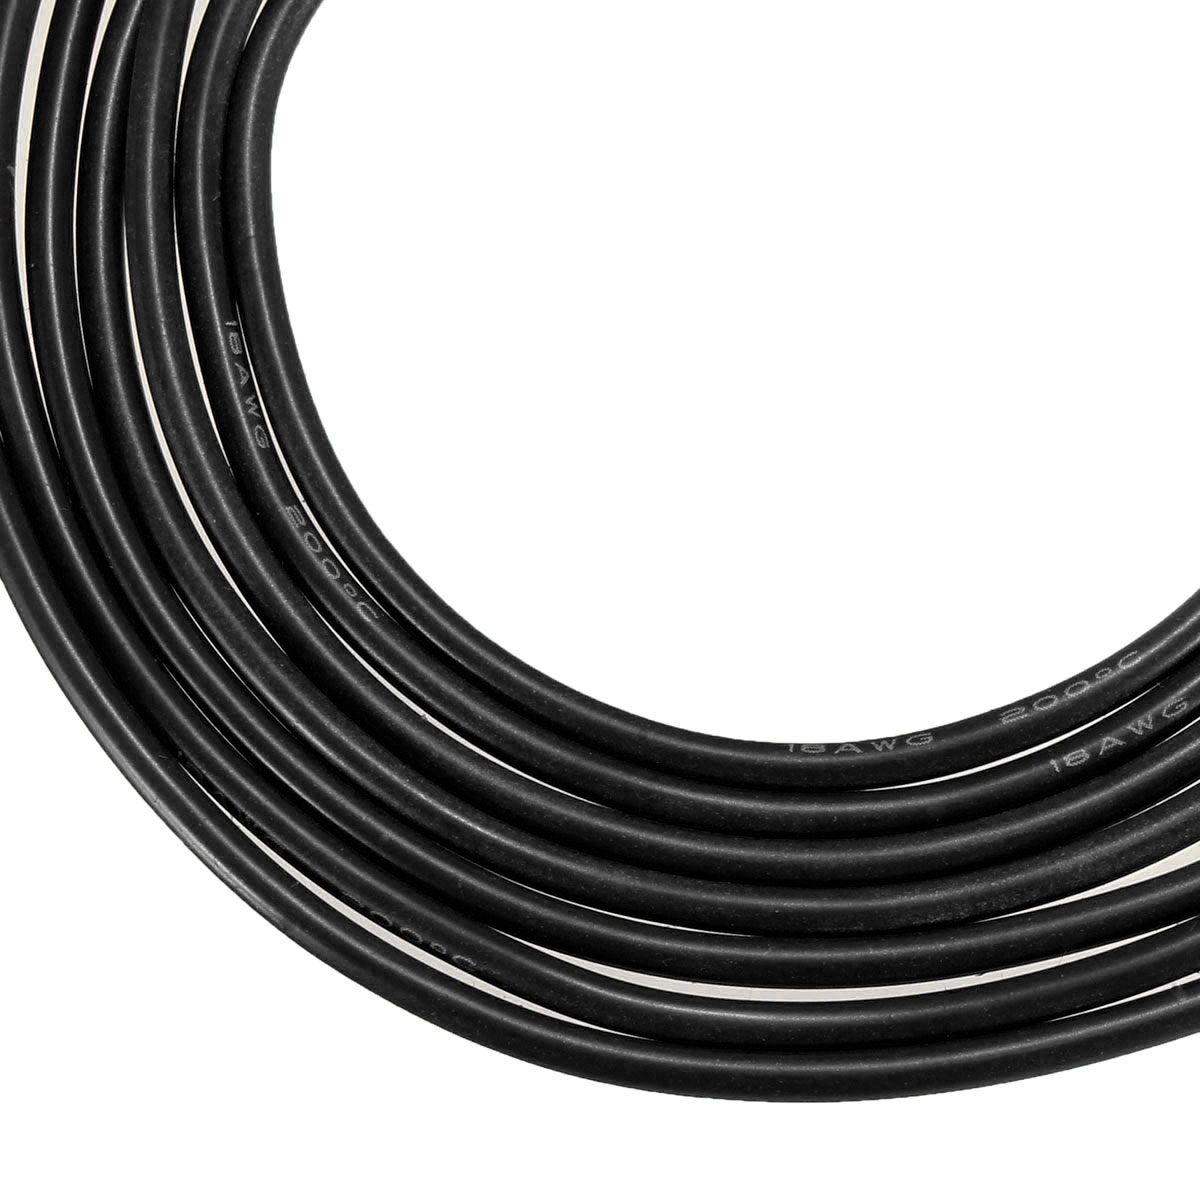 DANIU-2-Meter-Black-Silicone-Wire-Cable-10121416182022AWG-Flexible-Cable-1170287-5